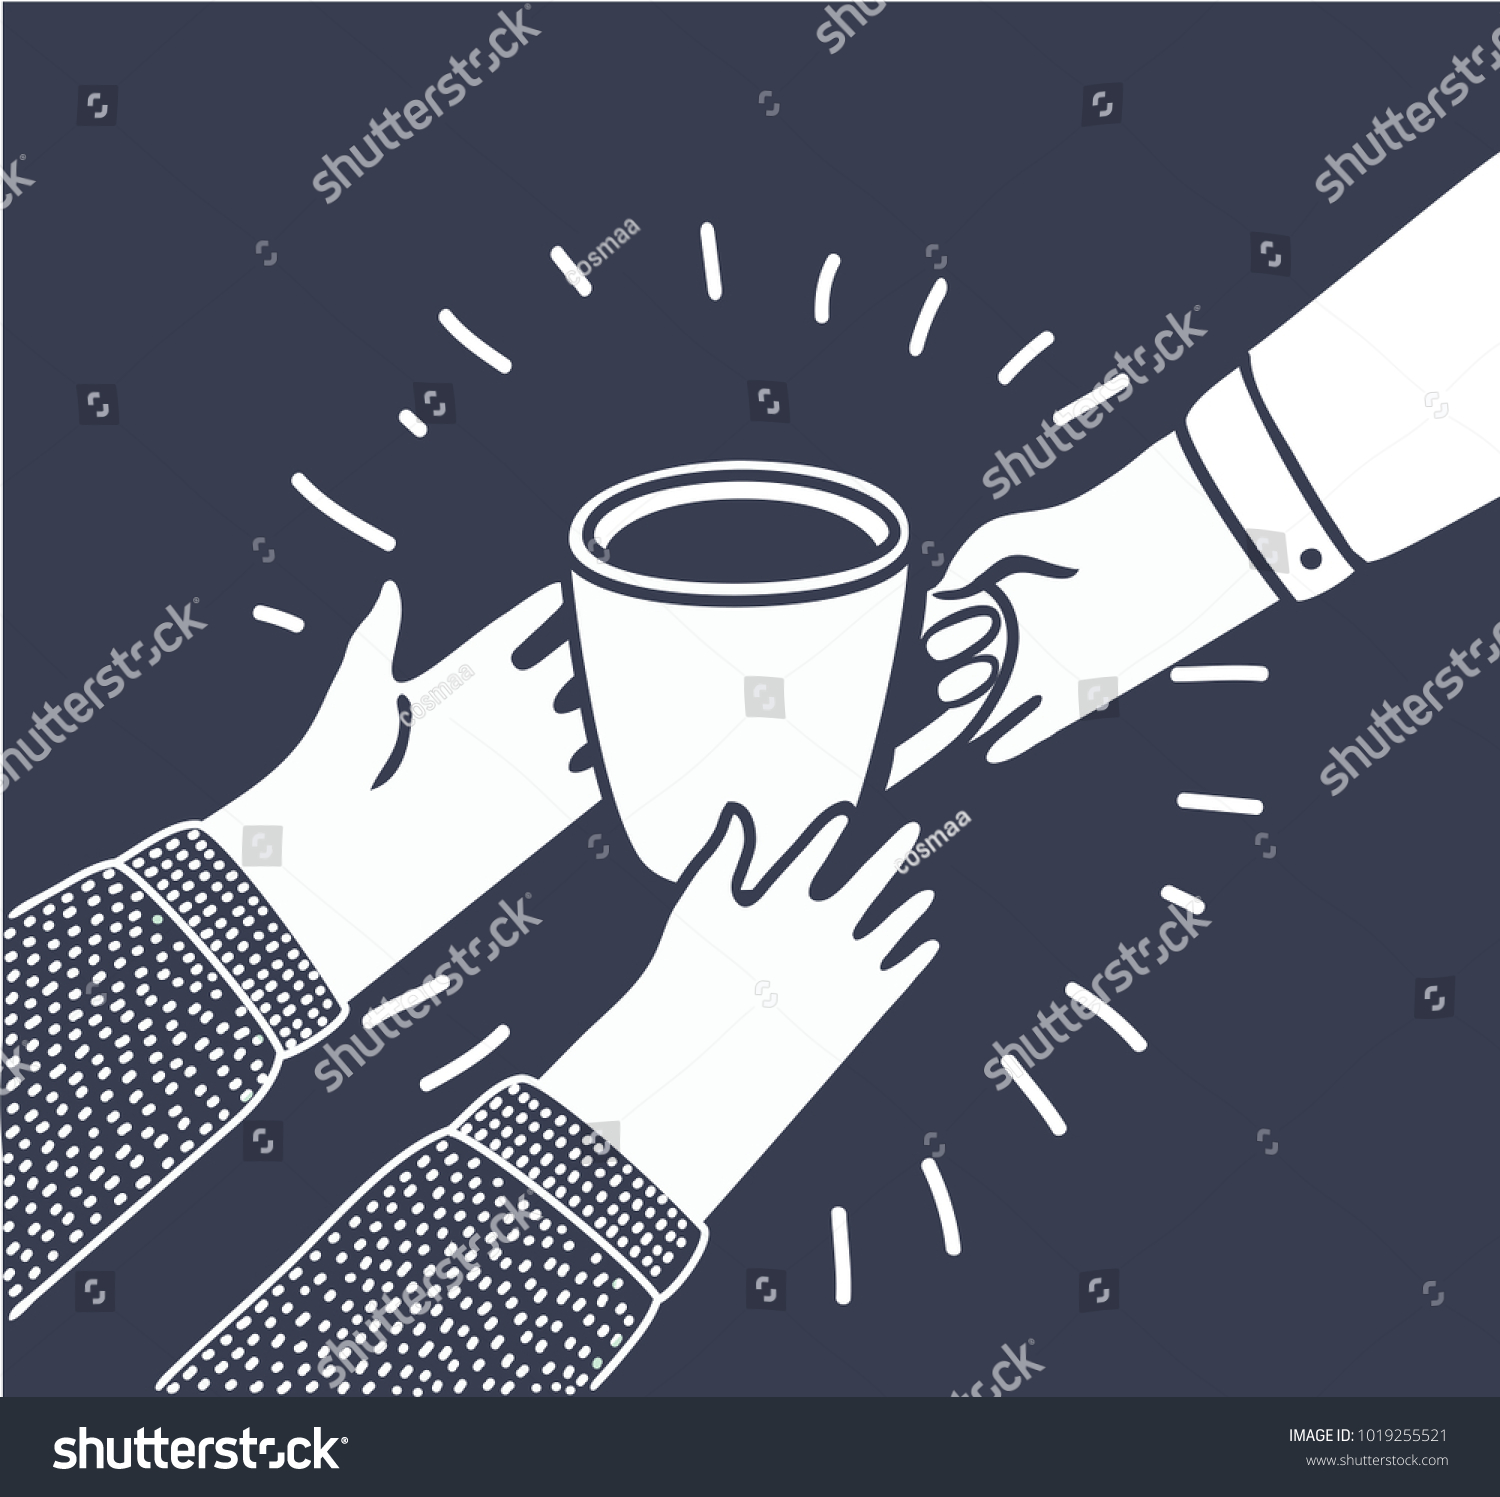 SVG of Vector illustration in cartoon style with persons gives another a Cup of coffee or tea from hand to hand. Help to the needy, humanity, charity, vulnerable sectors of society in black and white style svg